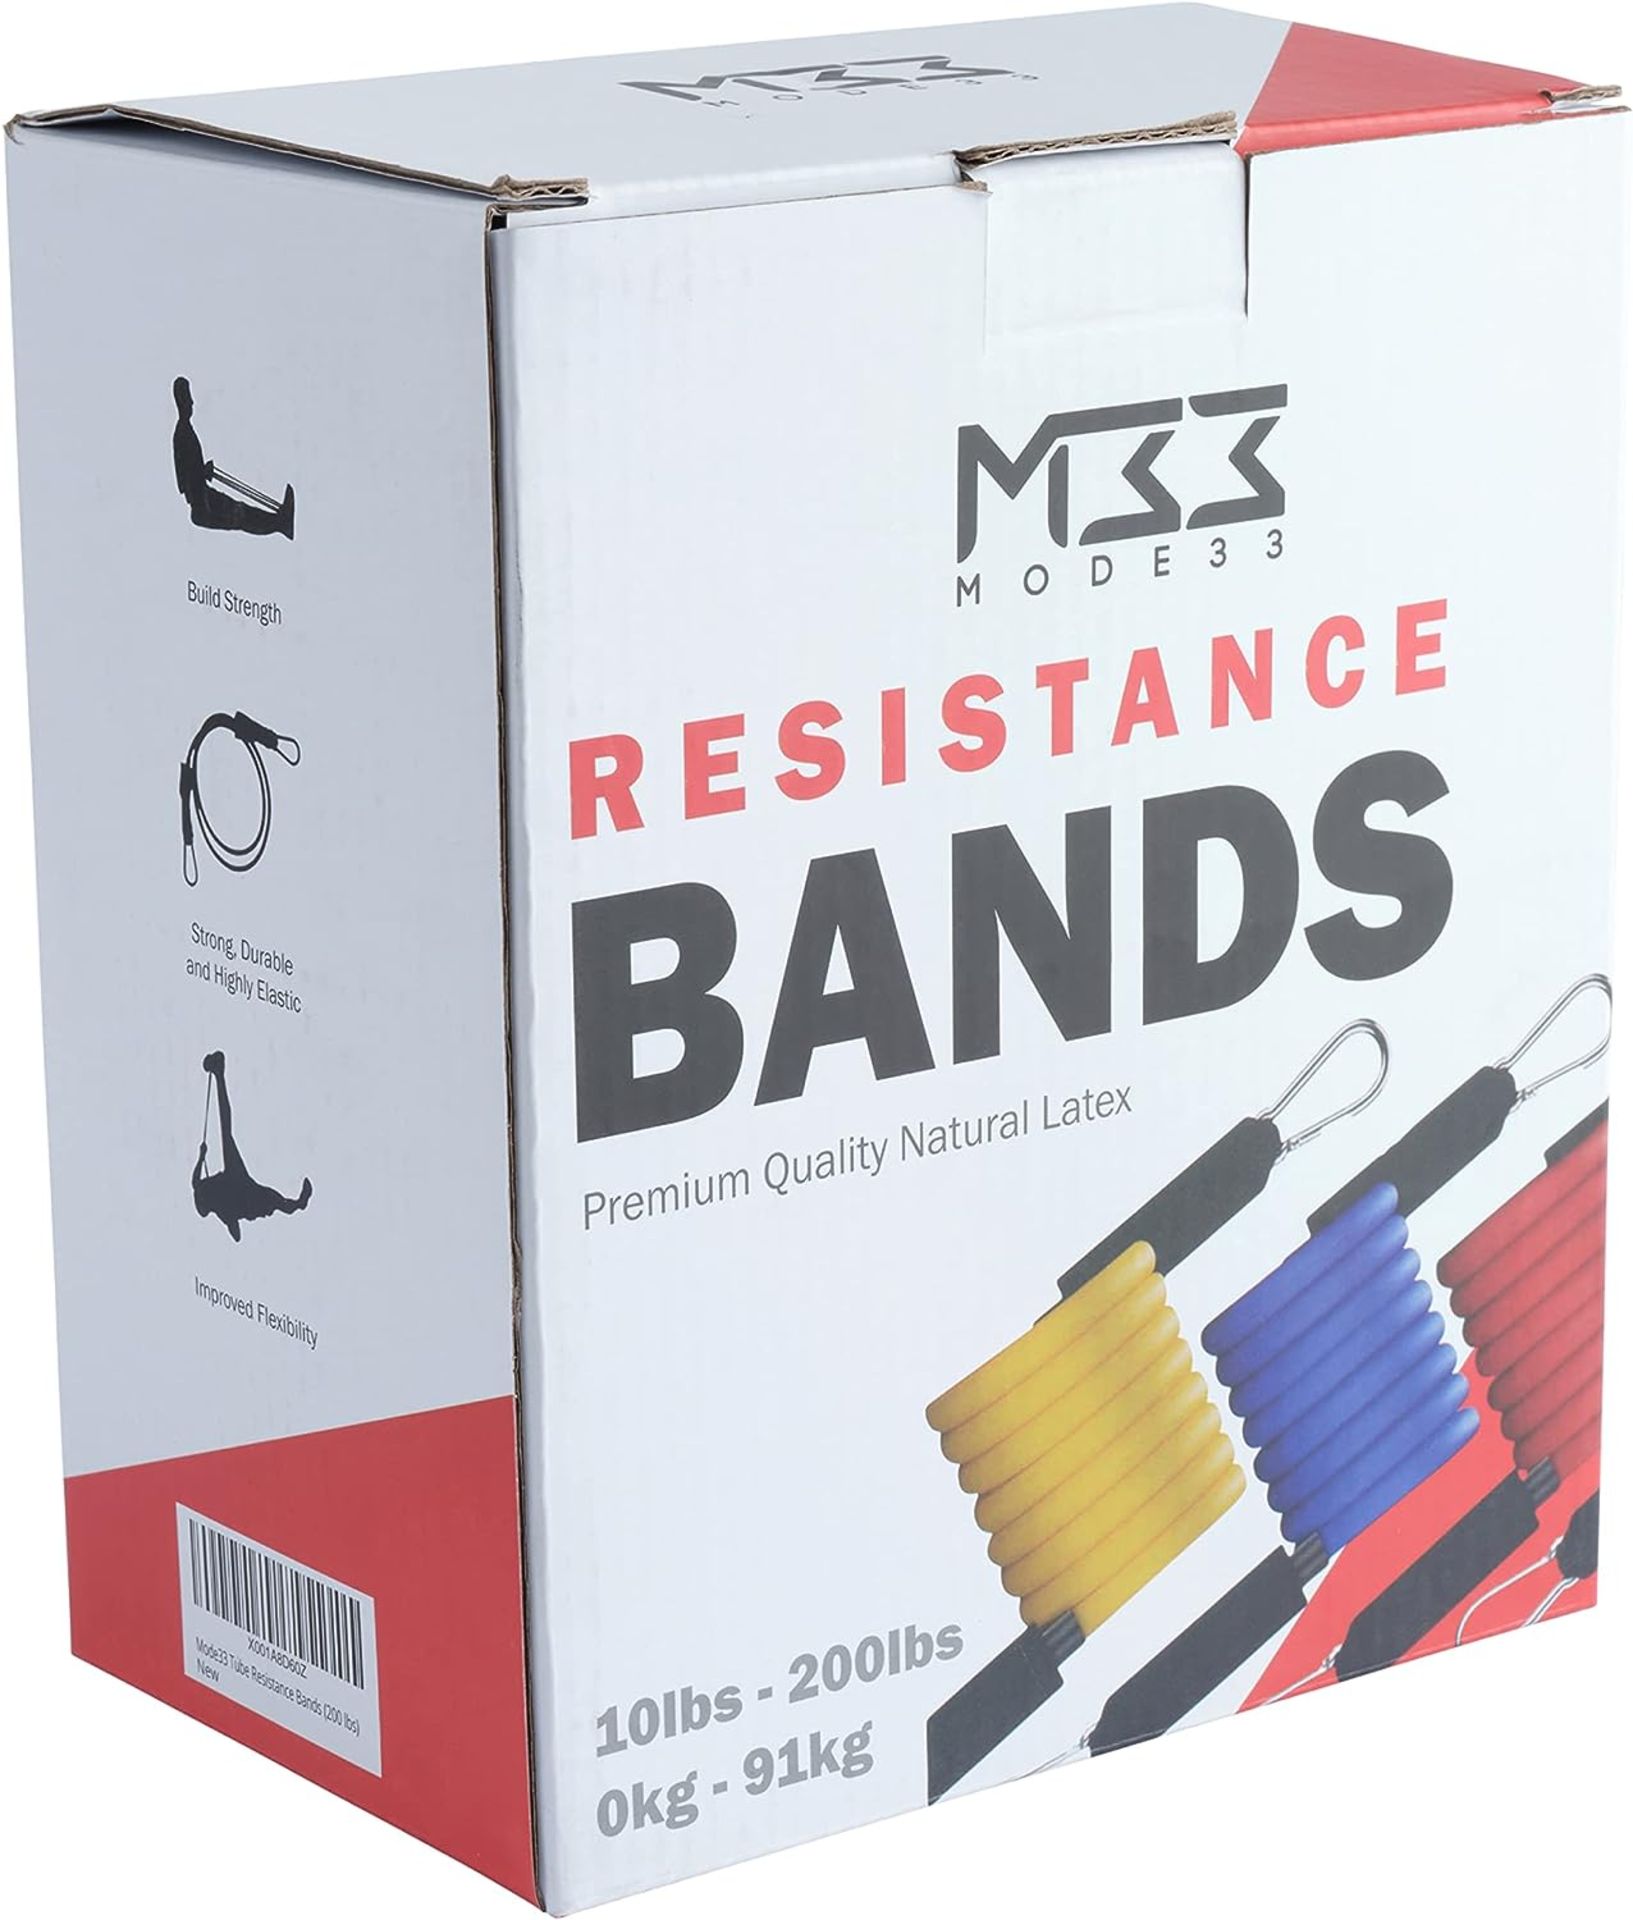 5 x NEW Mode33 Resistance Bands Set 100lbs â€“ Premium Latex Exercise Bands - RRP Â£84.95 ! - Image 3 of 7